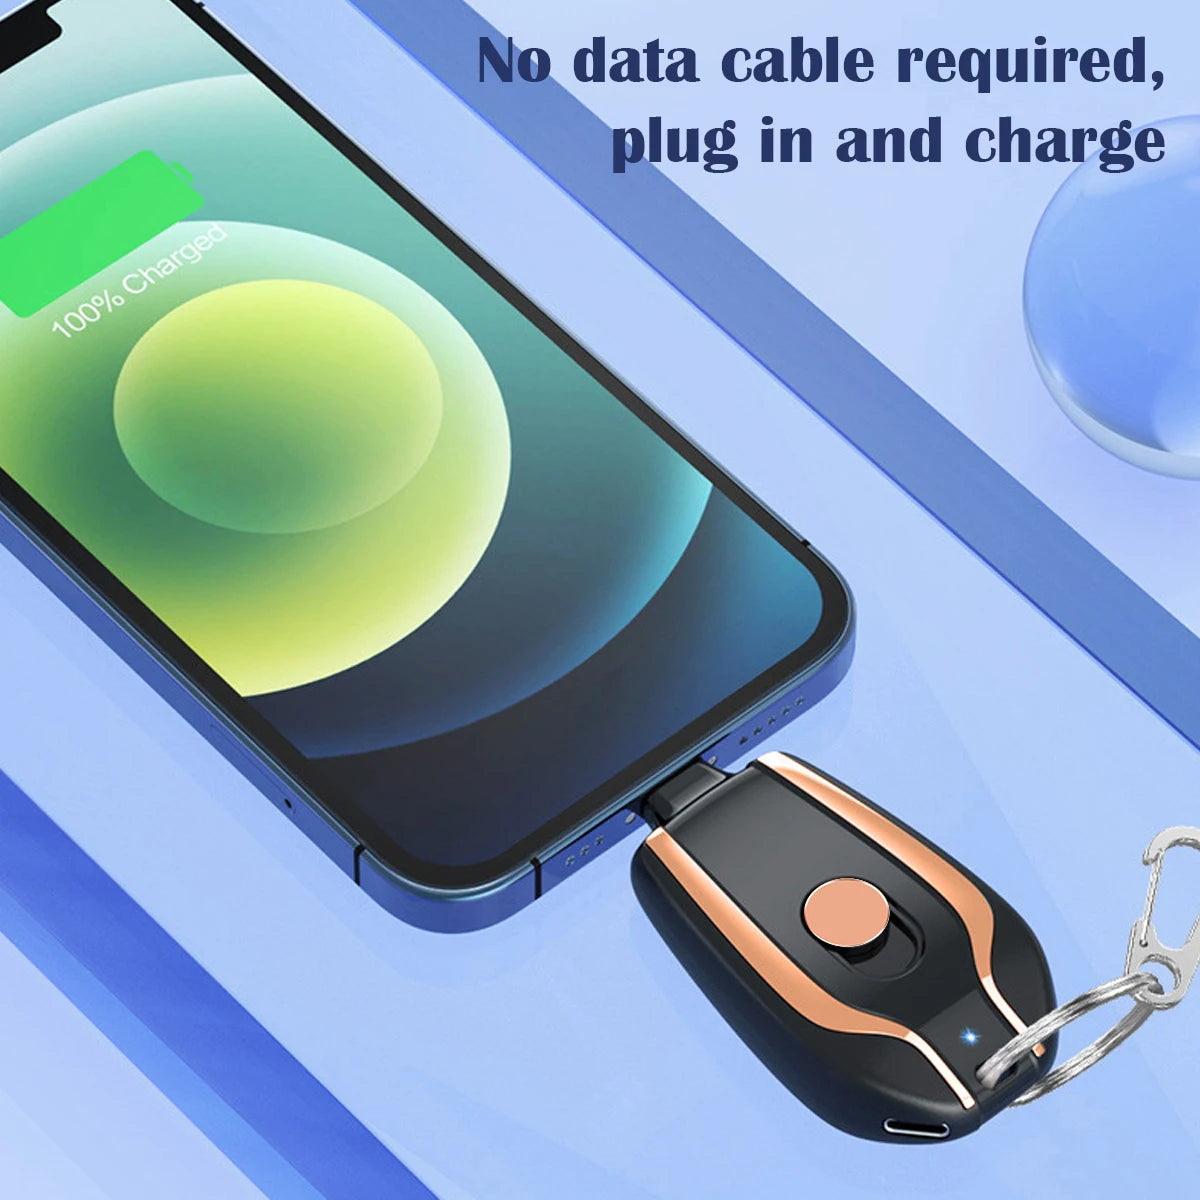 Compact Keychain Phone Charger